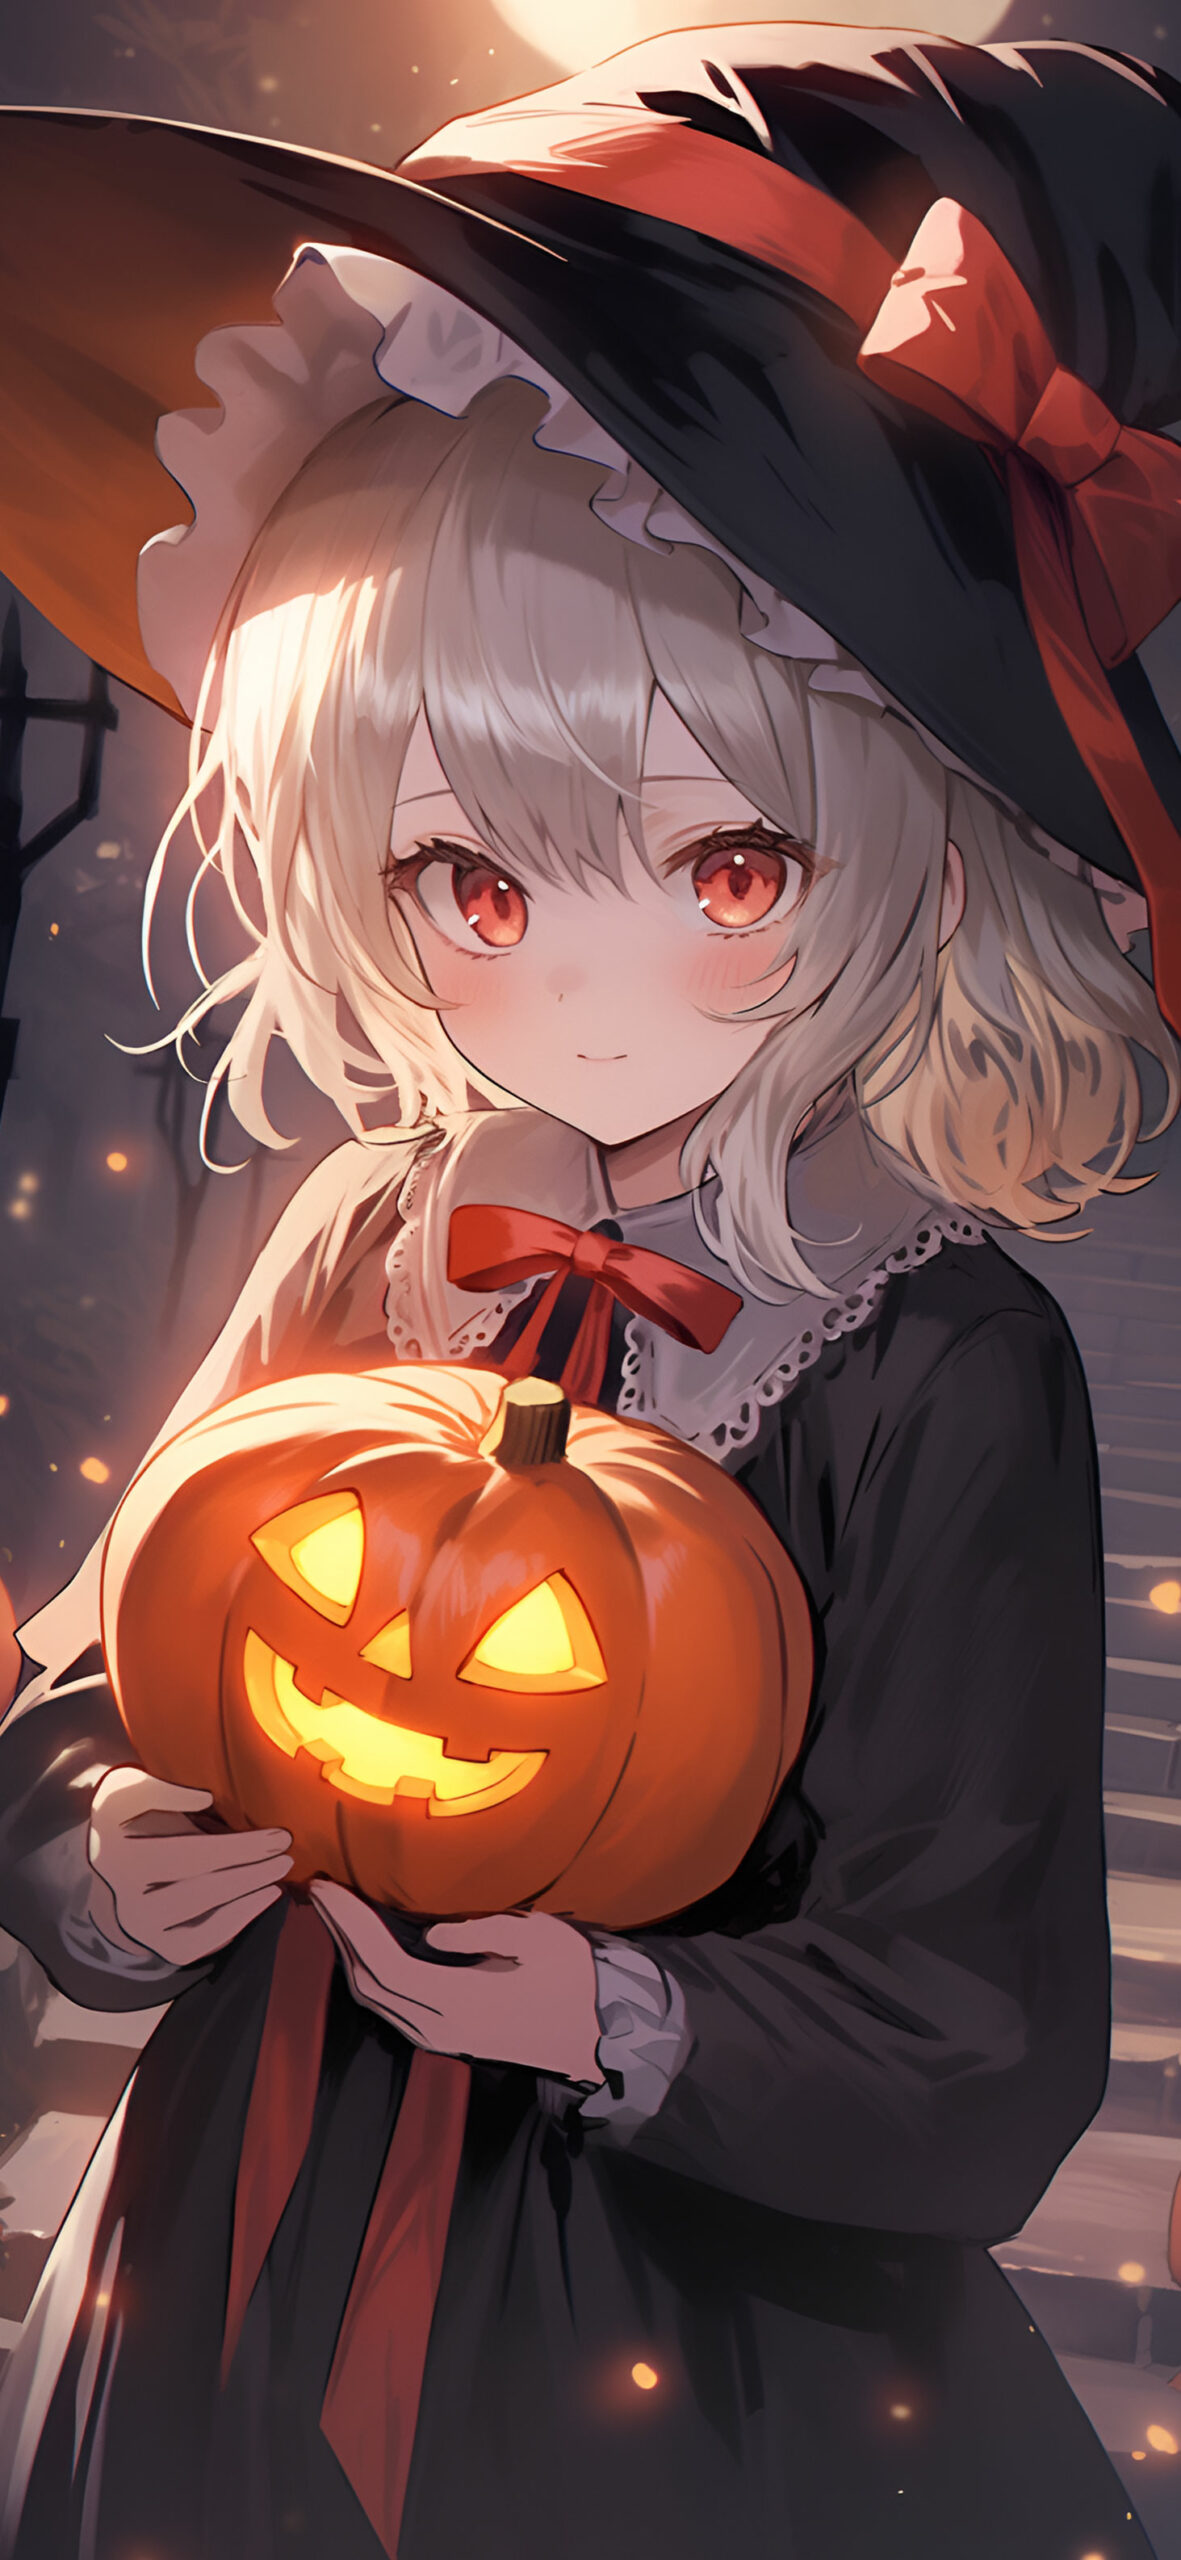 Female Witch Halloween Fantasy Halloween Anime Background, Halloween Group  Picture Background Image And Wallpaper for Free Download